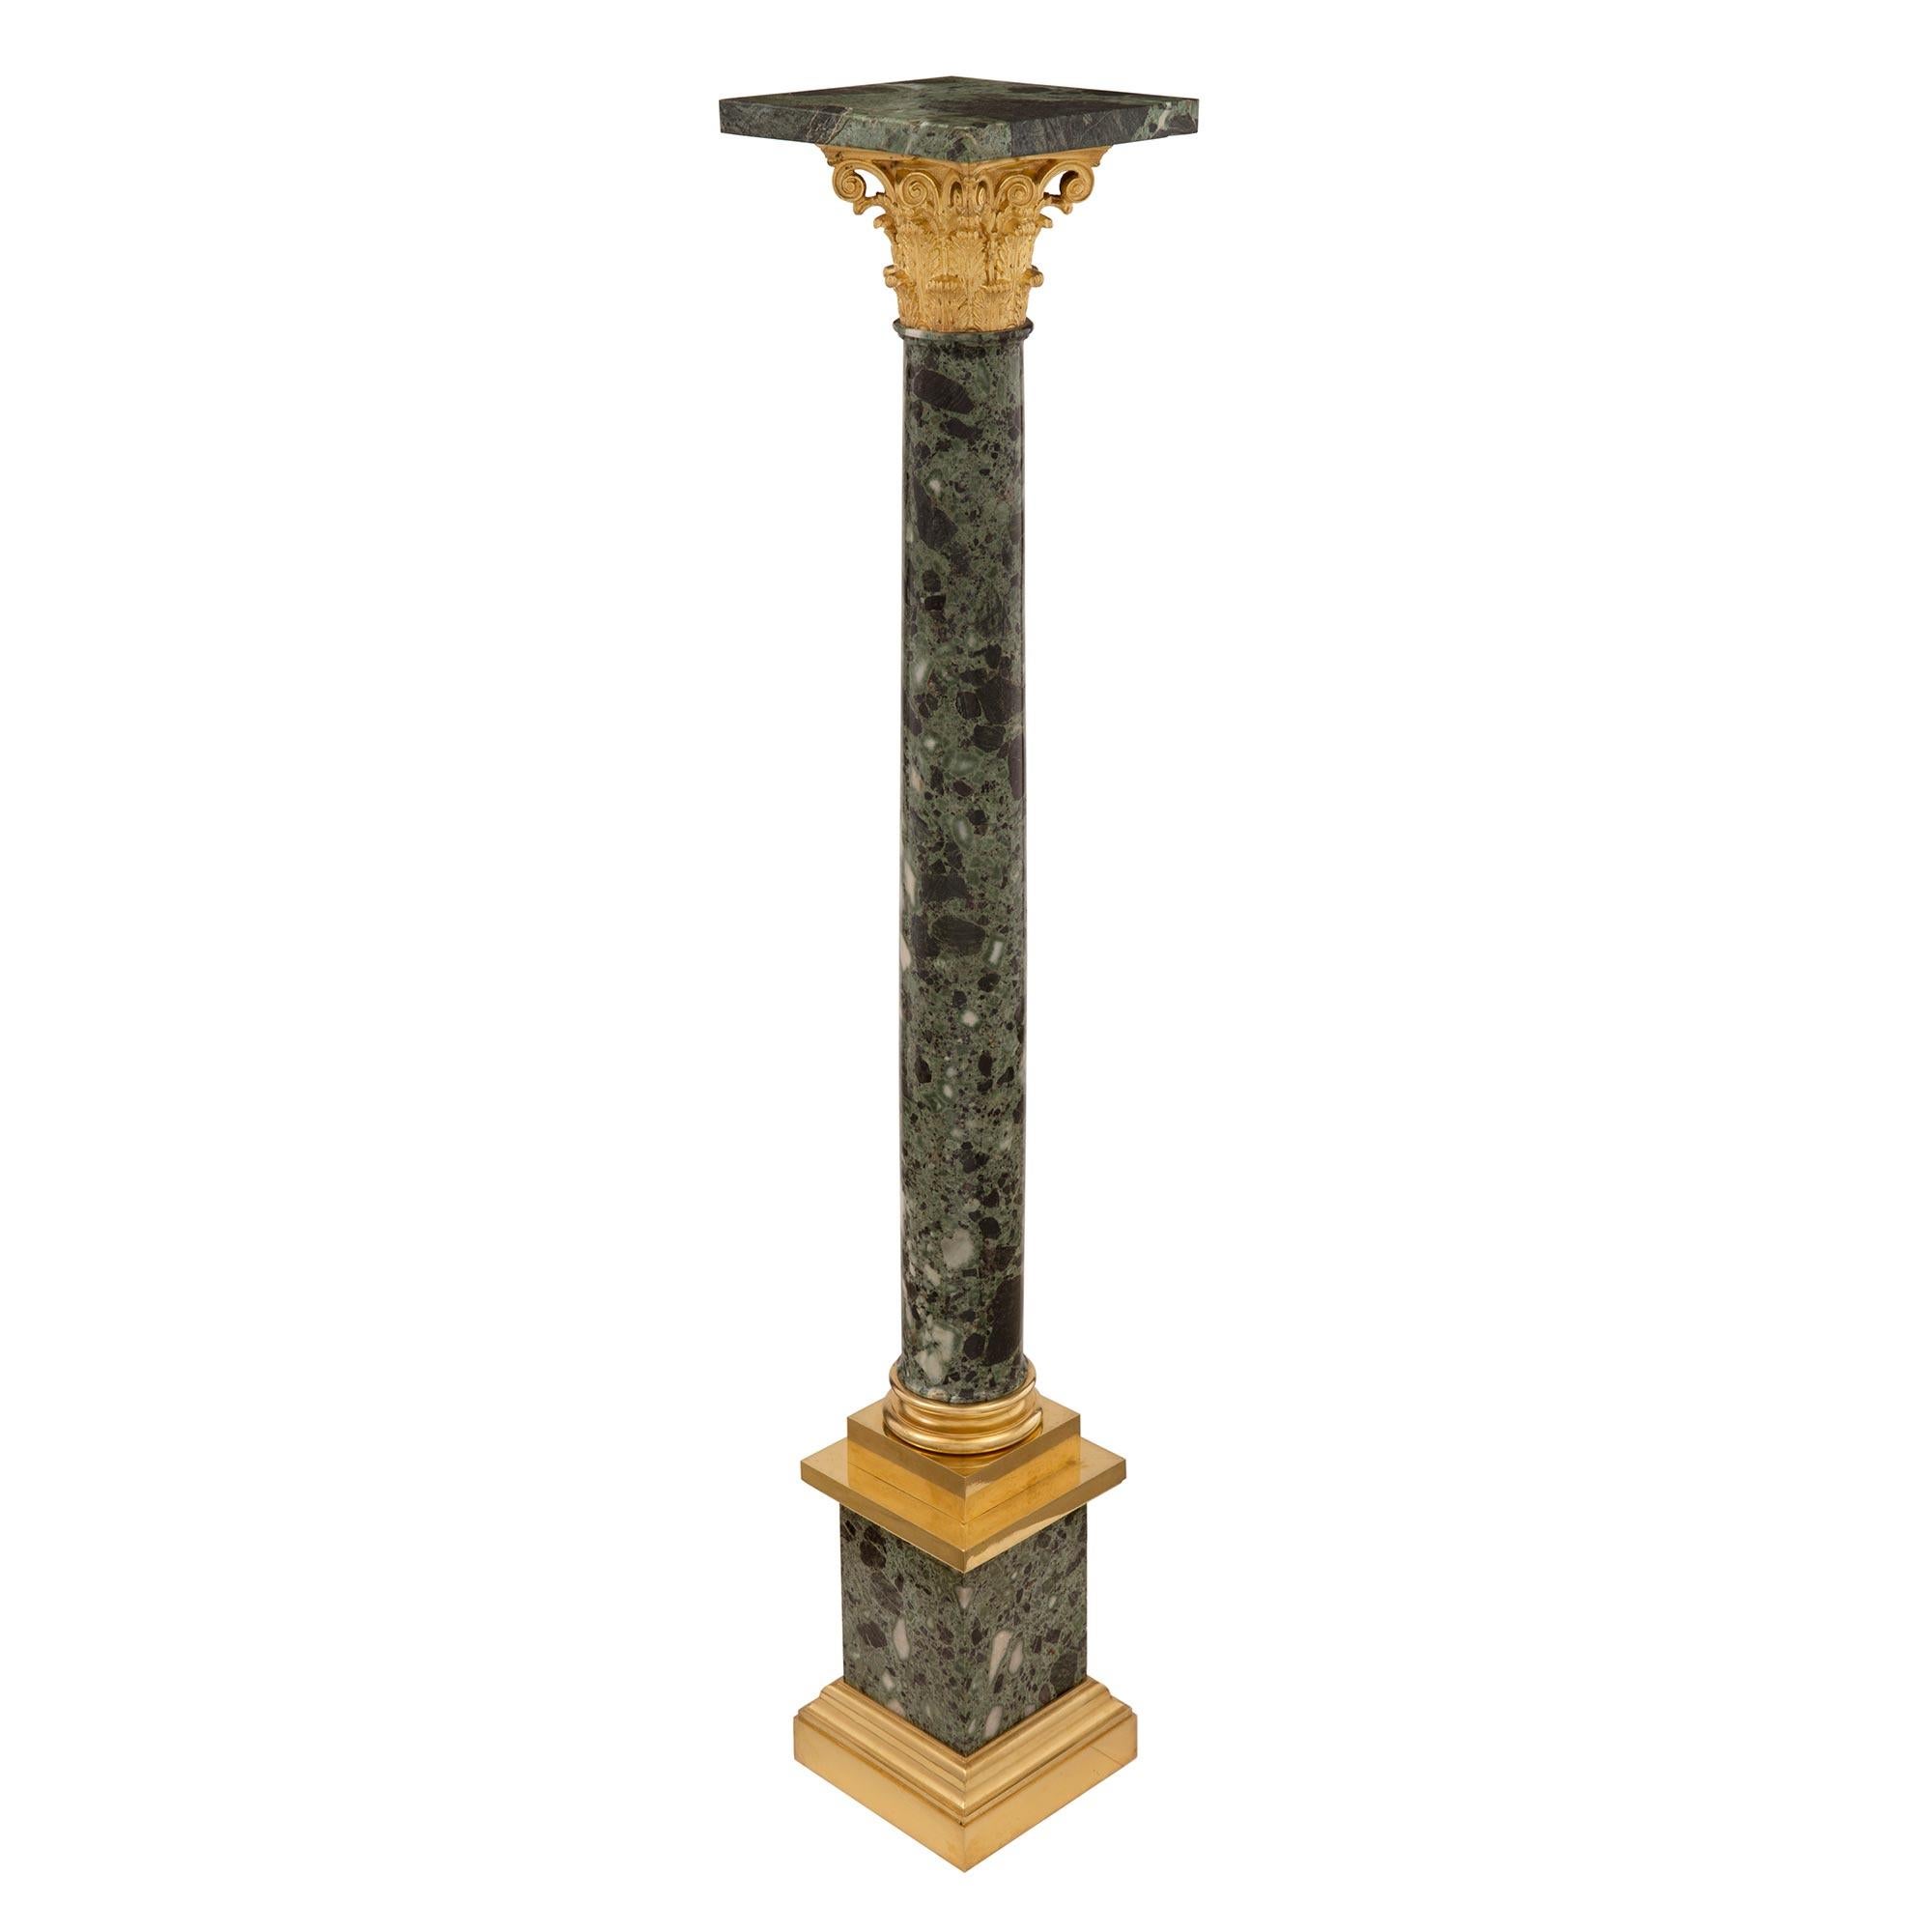 French 19th Century Louis XVI Style Ormolu and Marble Pedestal Column In Good Condition For Sale In West Palm Beach, FL